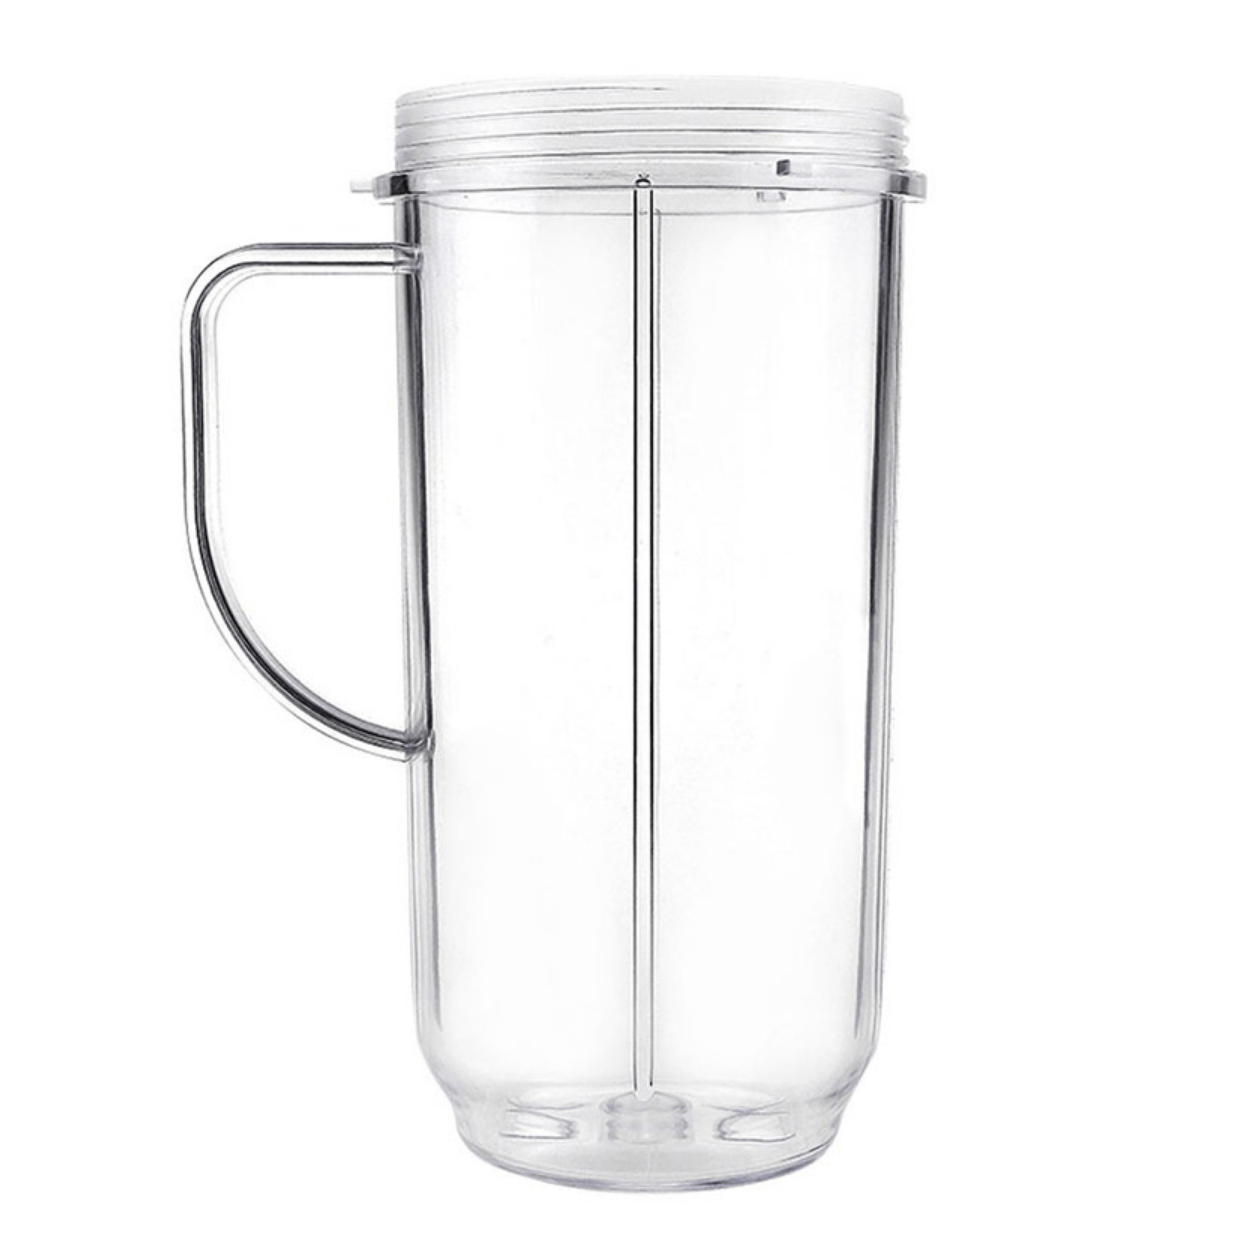 16oz Cups 6 Piece Set - 3 Replacement Cups WITH LIDS for Magic Bullet  Blender LIDS INCLUDED